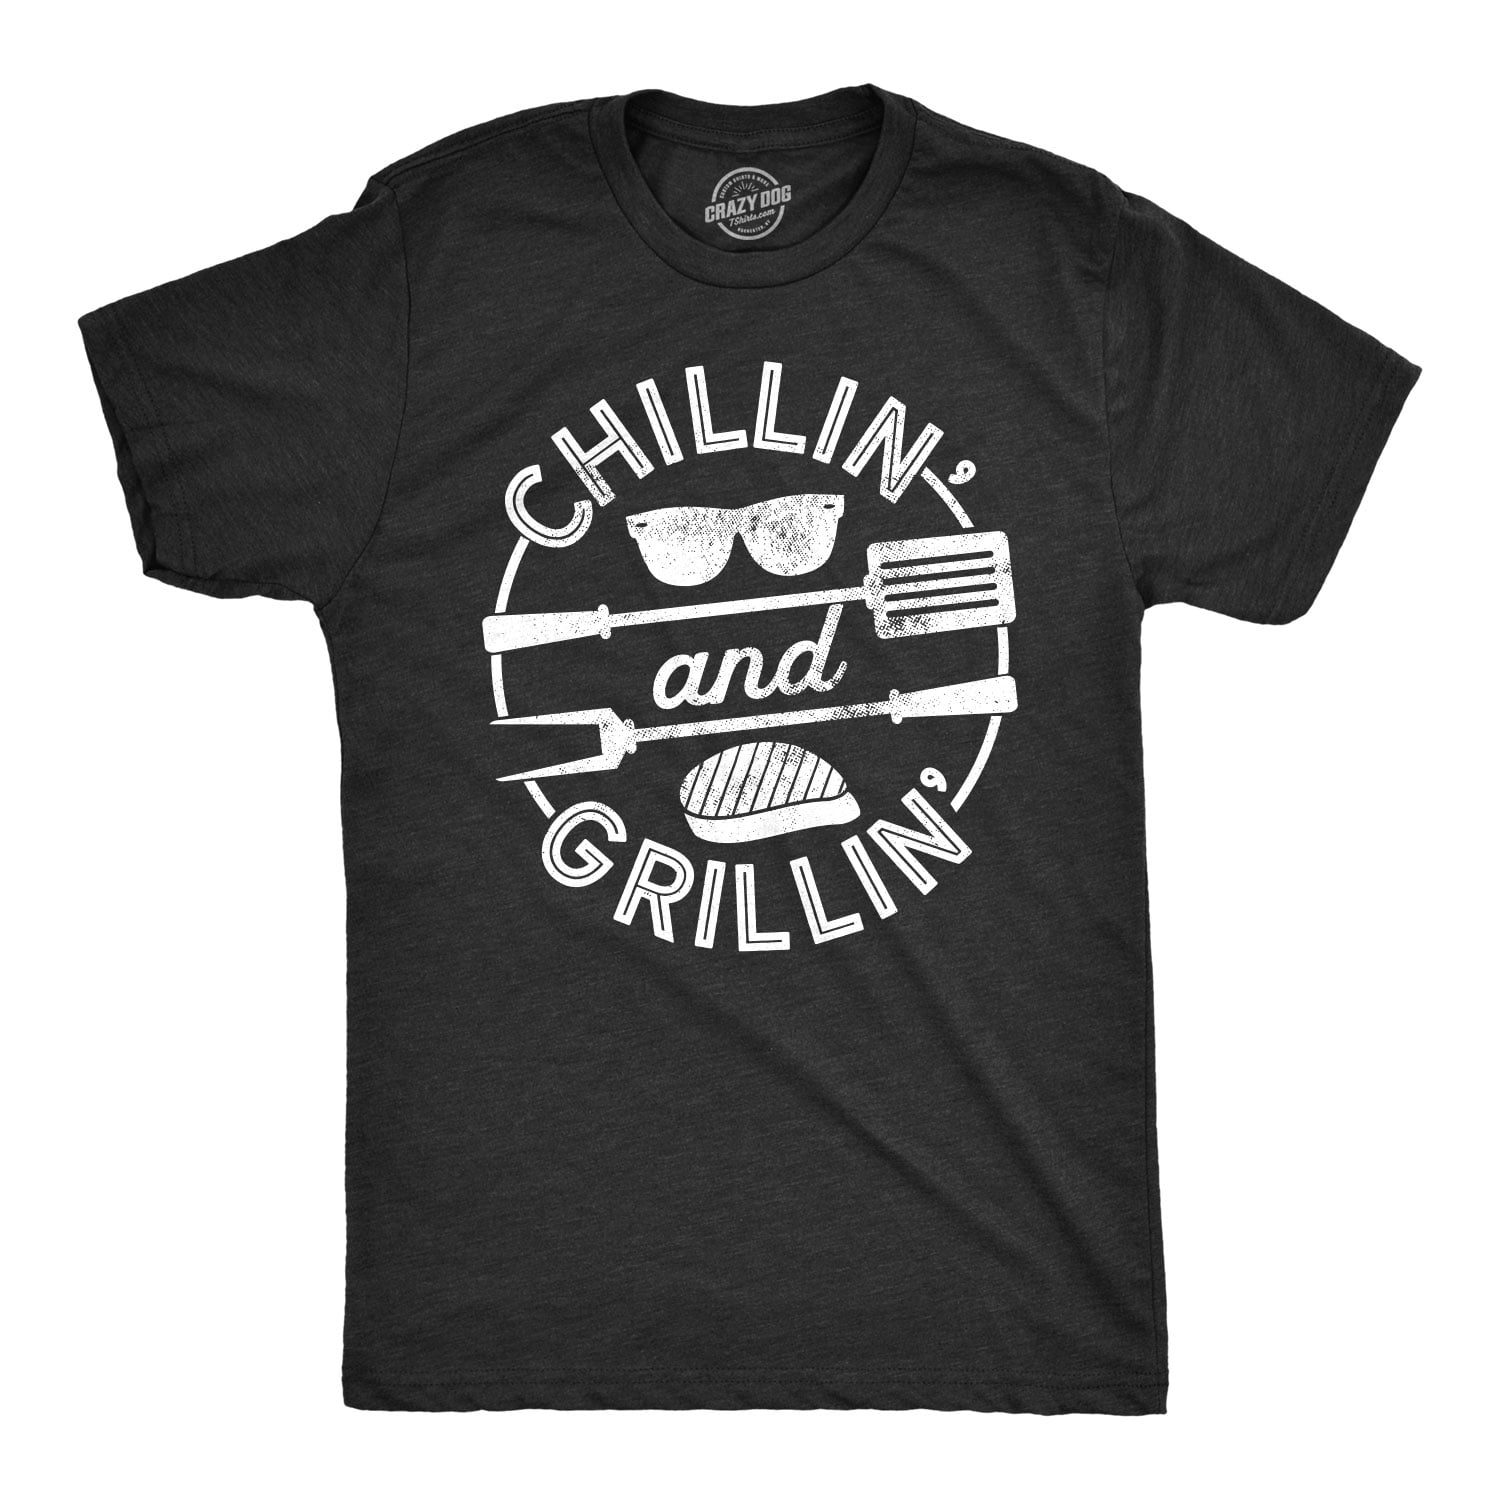 Crazy Dog T-Shirts Mens Chillin and Grillin Tshirt Funny Outdoor Summer BBQ Tee for Guys 